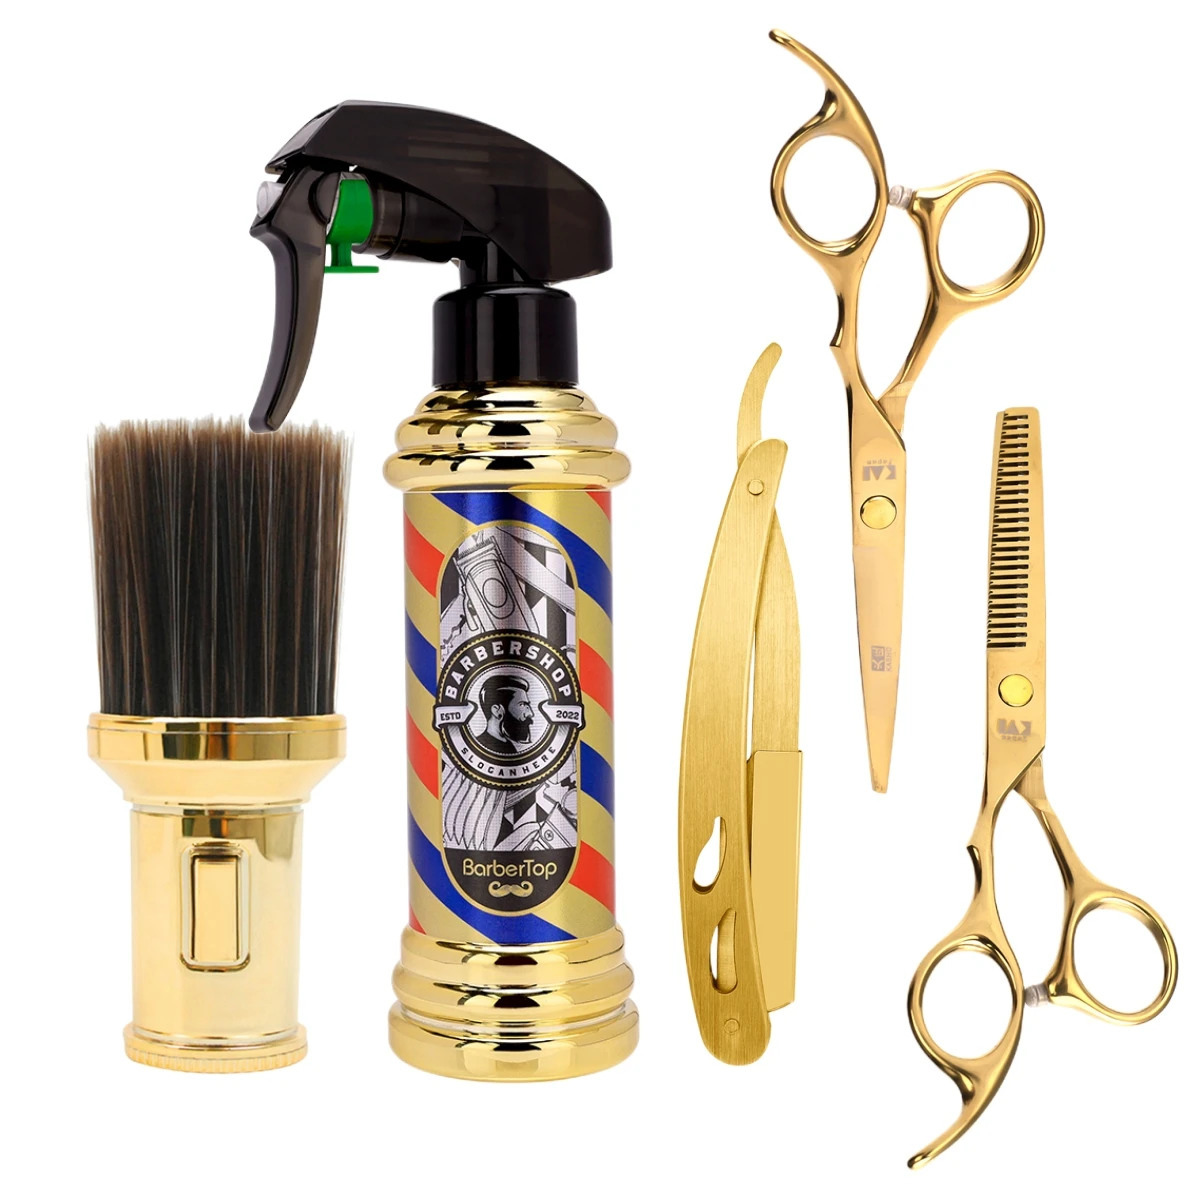 

5PCS/set Hairdressing Styling Tools Gold Barber Spary Bottle 6 Inch Haircut Scissors Men Manual Shaver Salon Hair Cleaning Brush